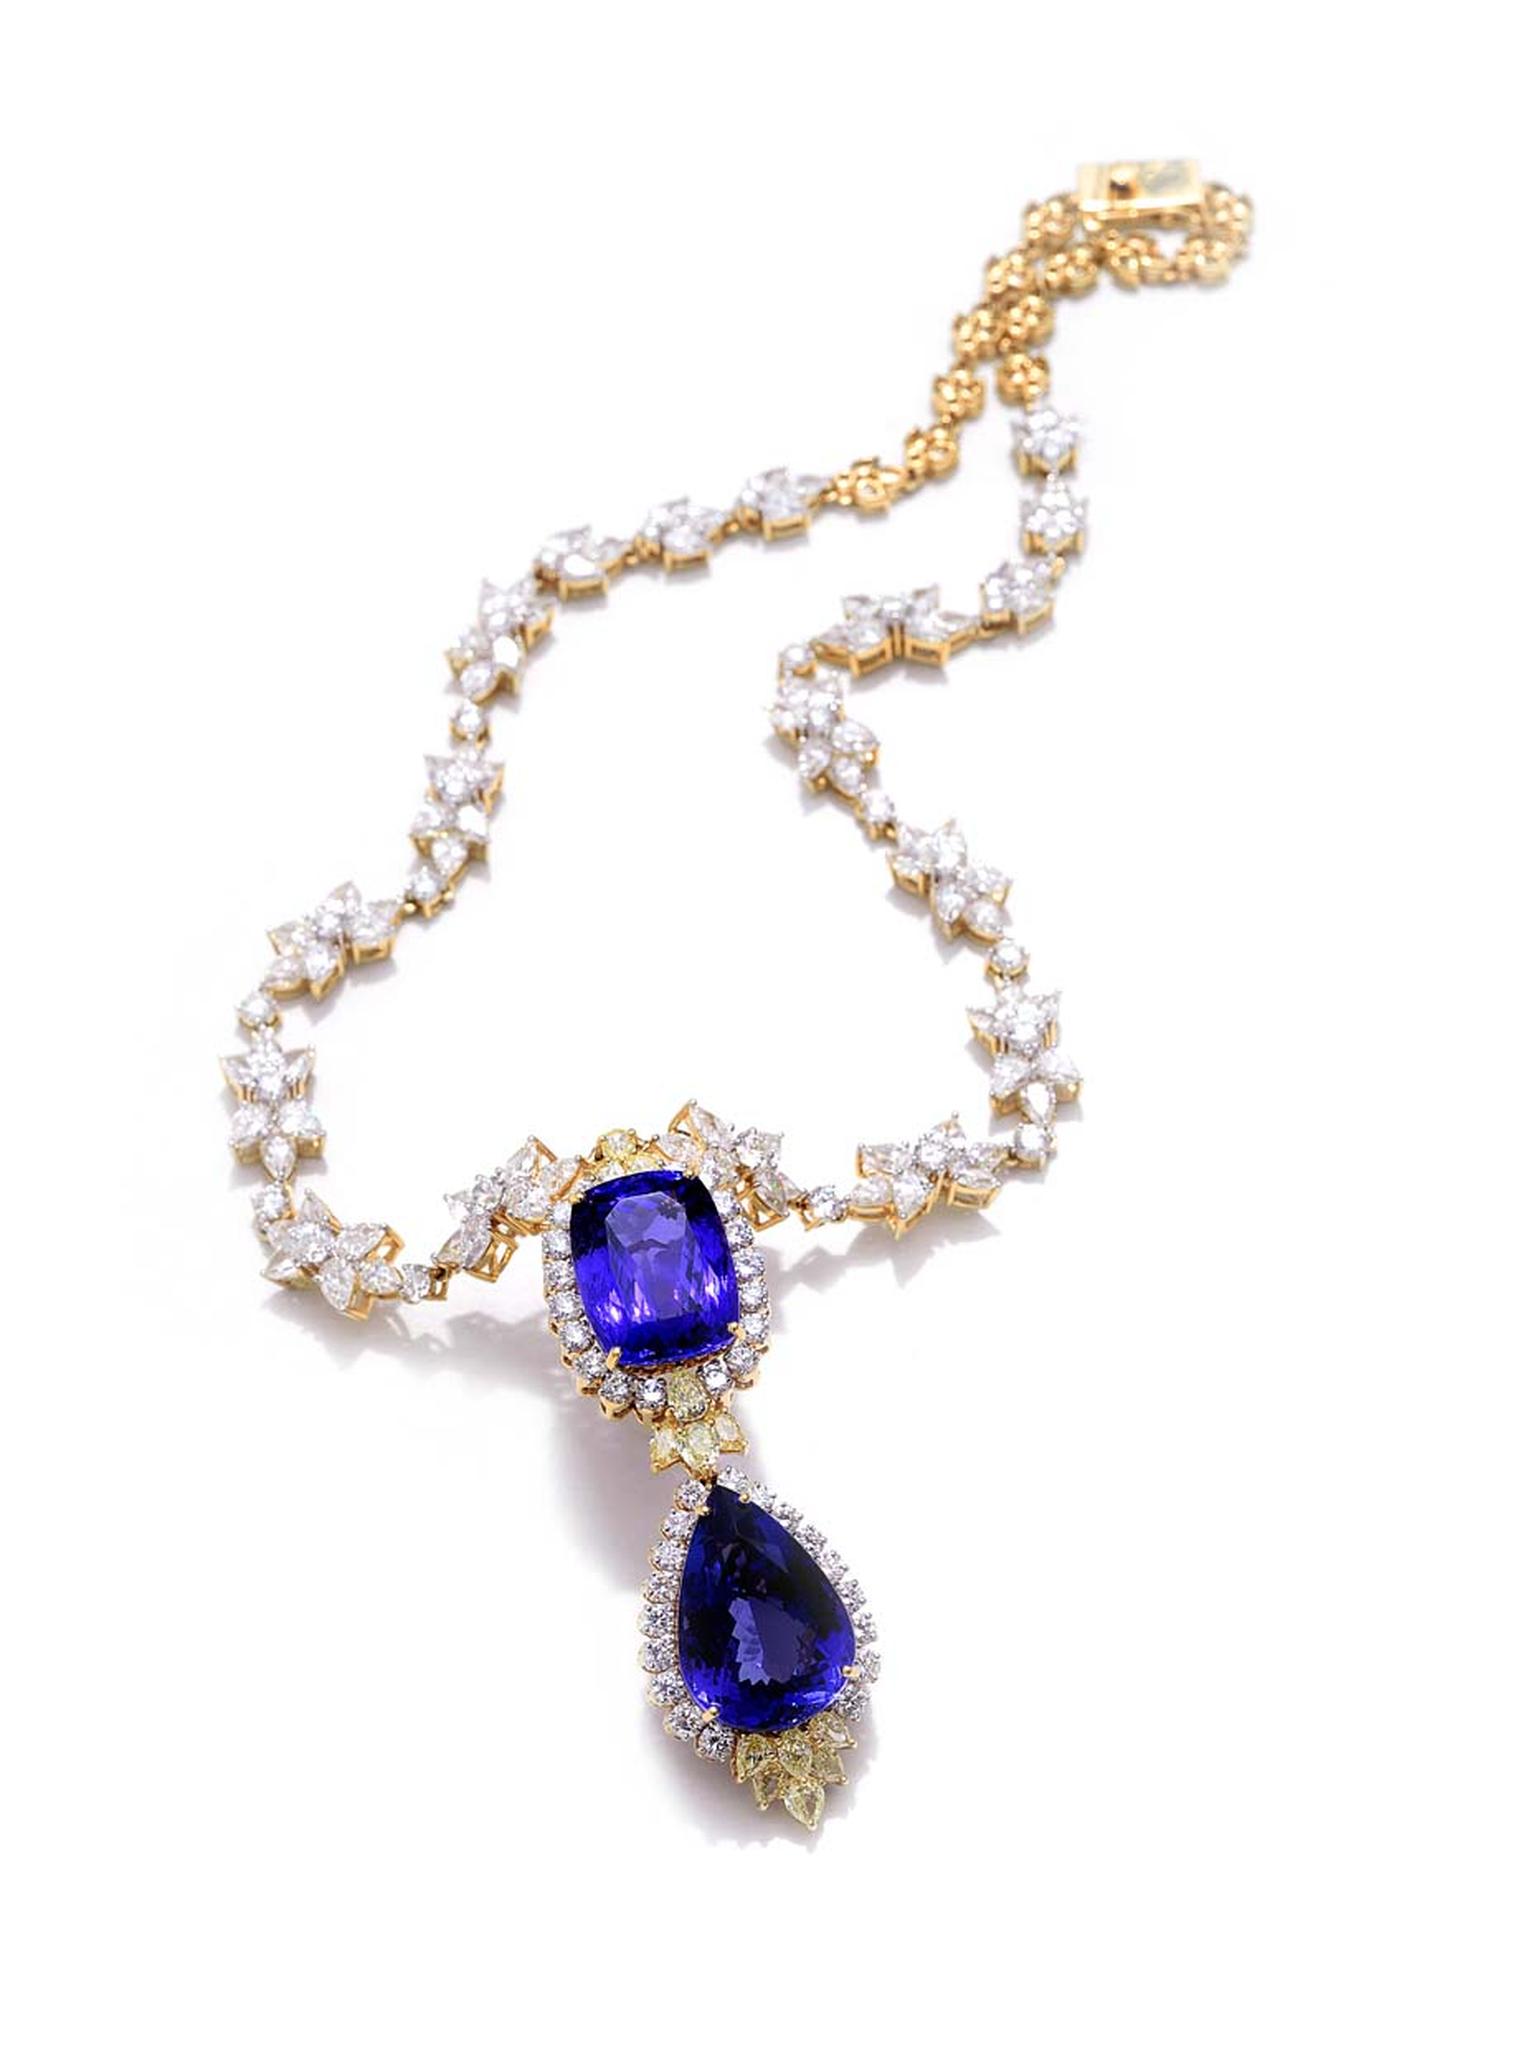 Farah Khan classic diamond necklace with cushion-shaped and pear-shaped tanzanite accented by yellow sapphires set in yellow gold.